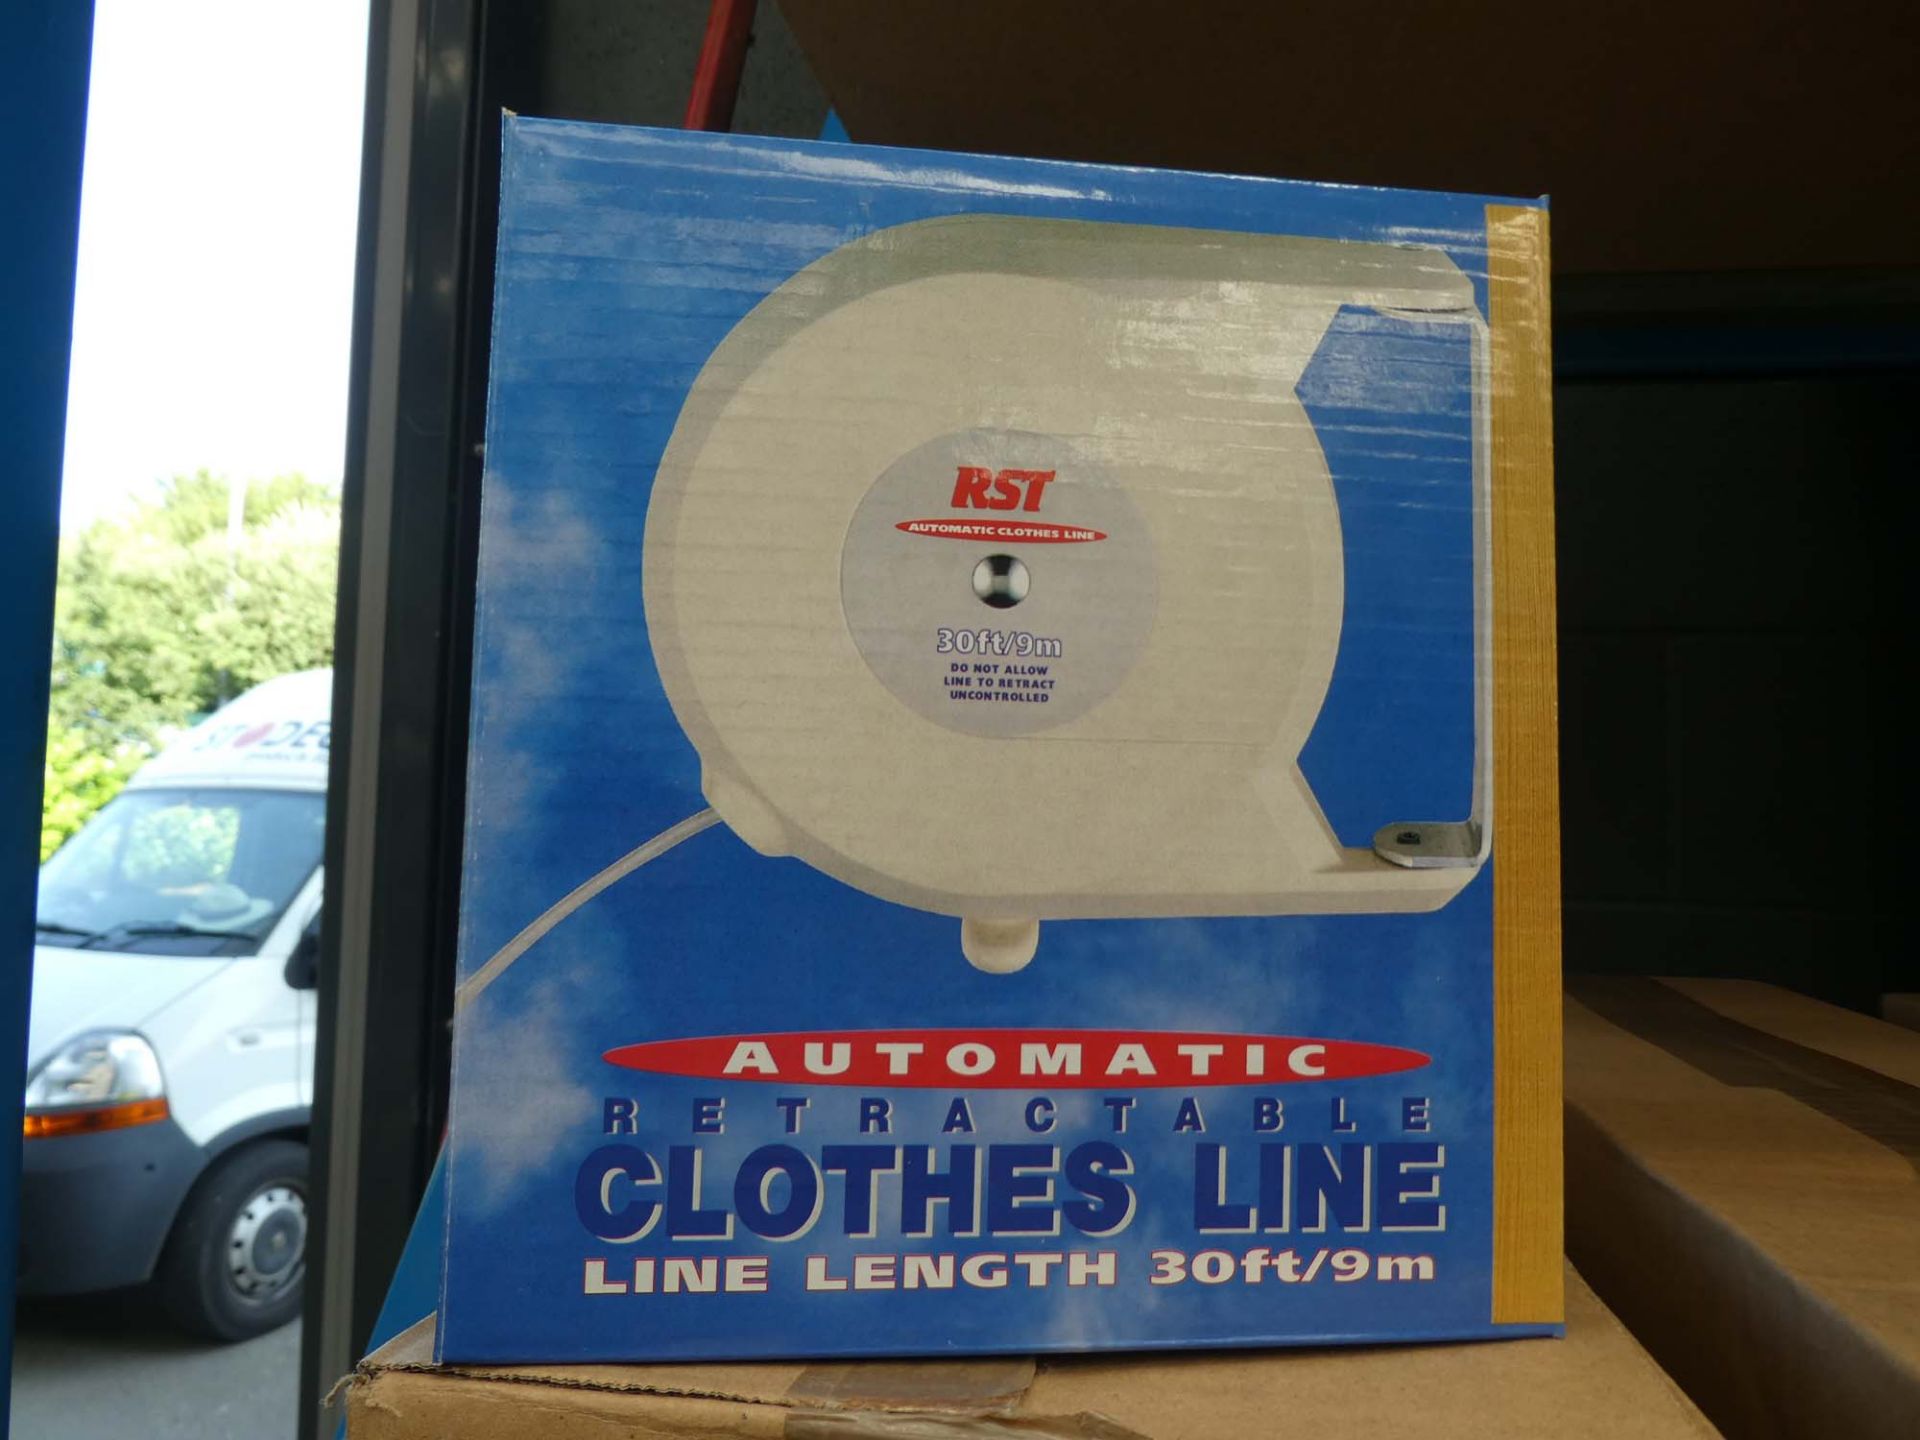 2 boxes containing 10 retractable clothes lines